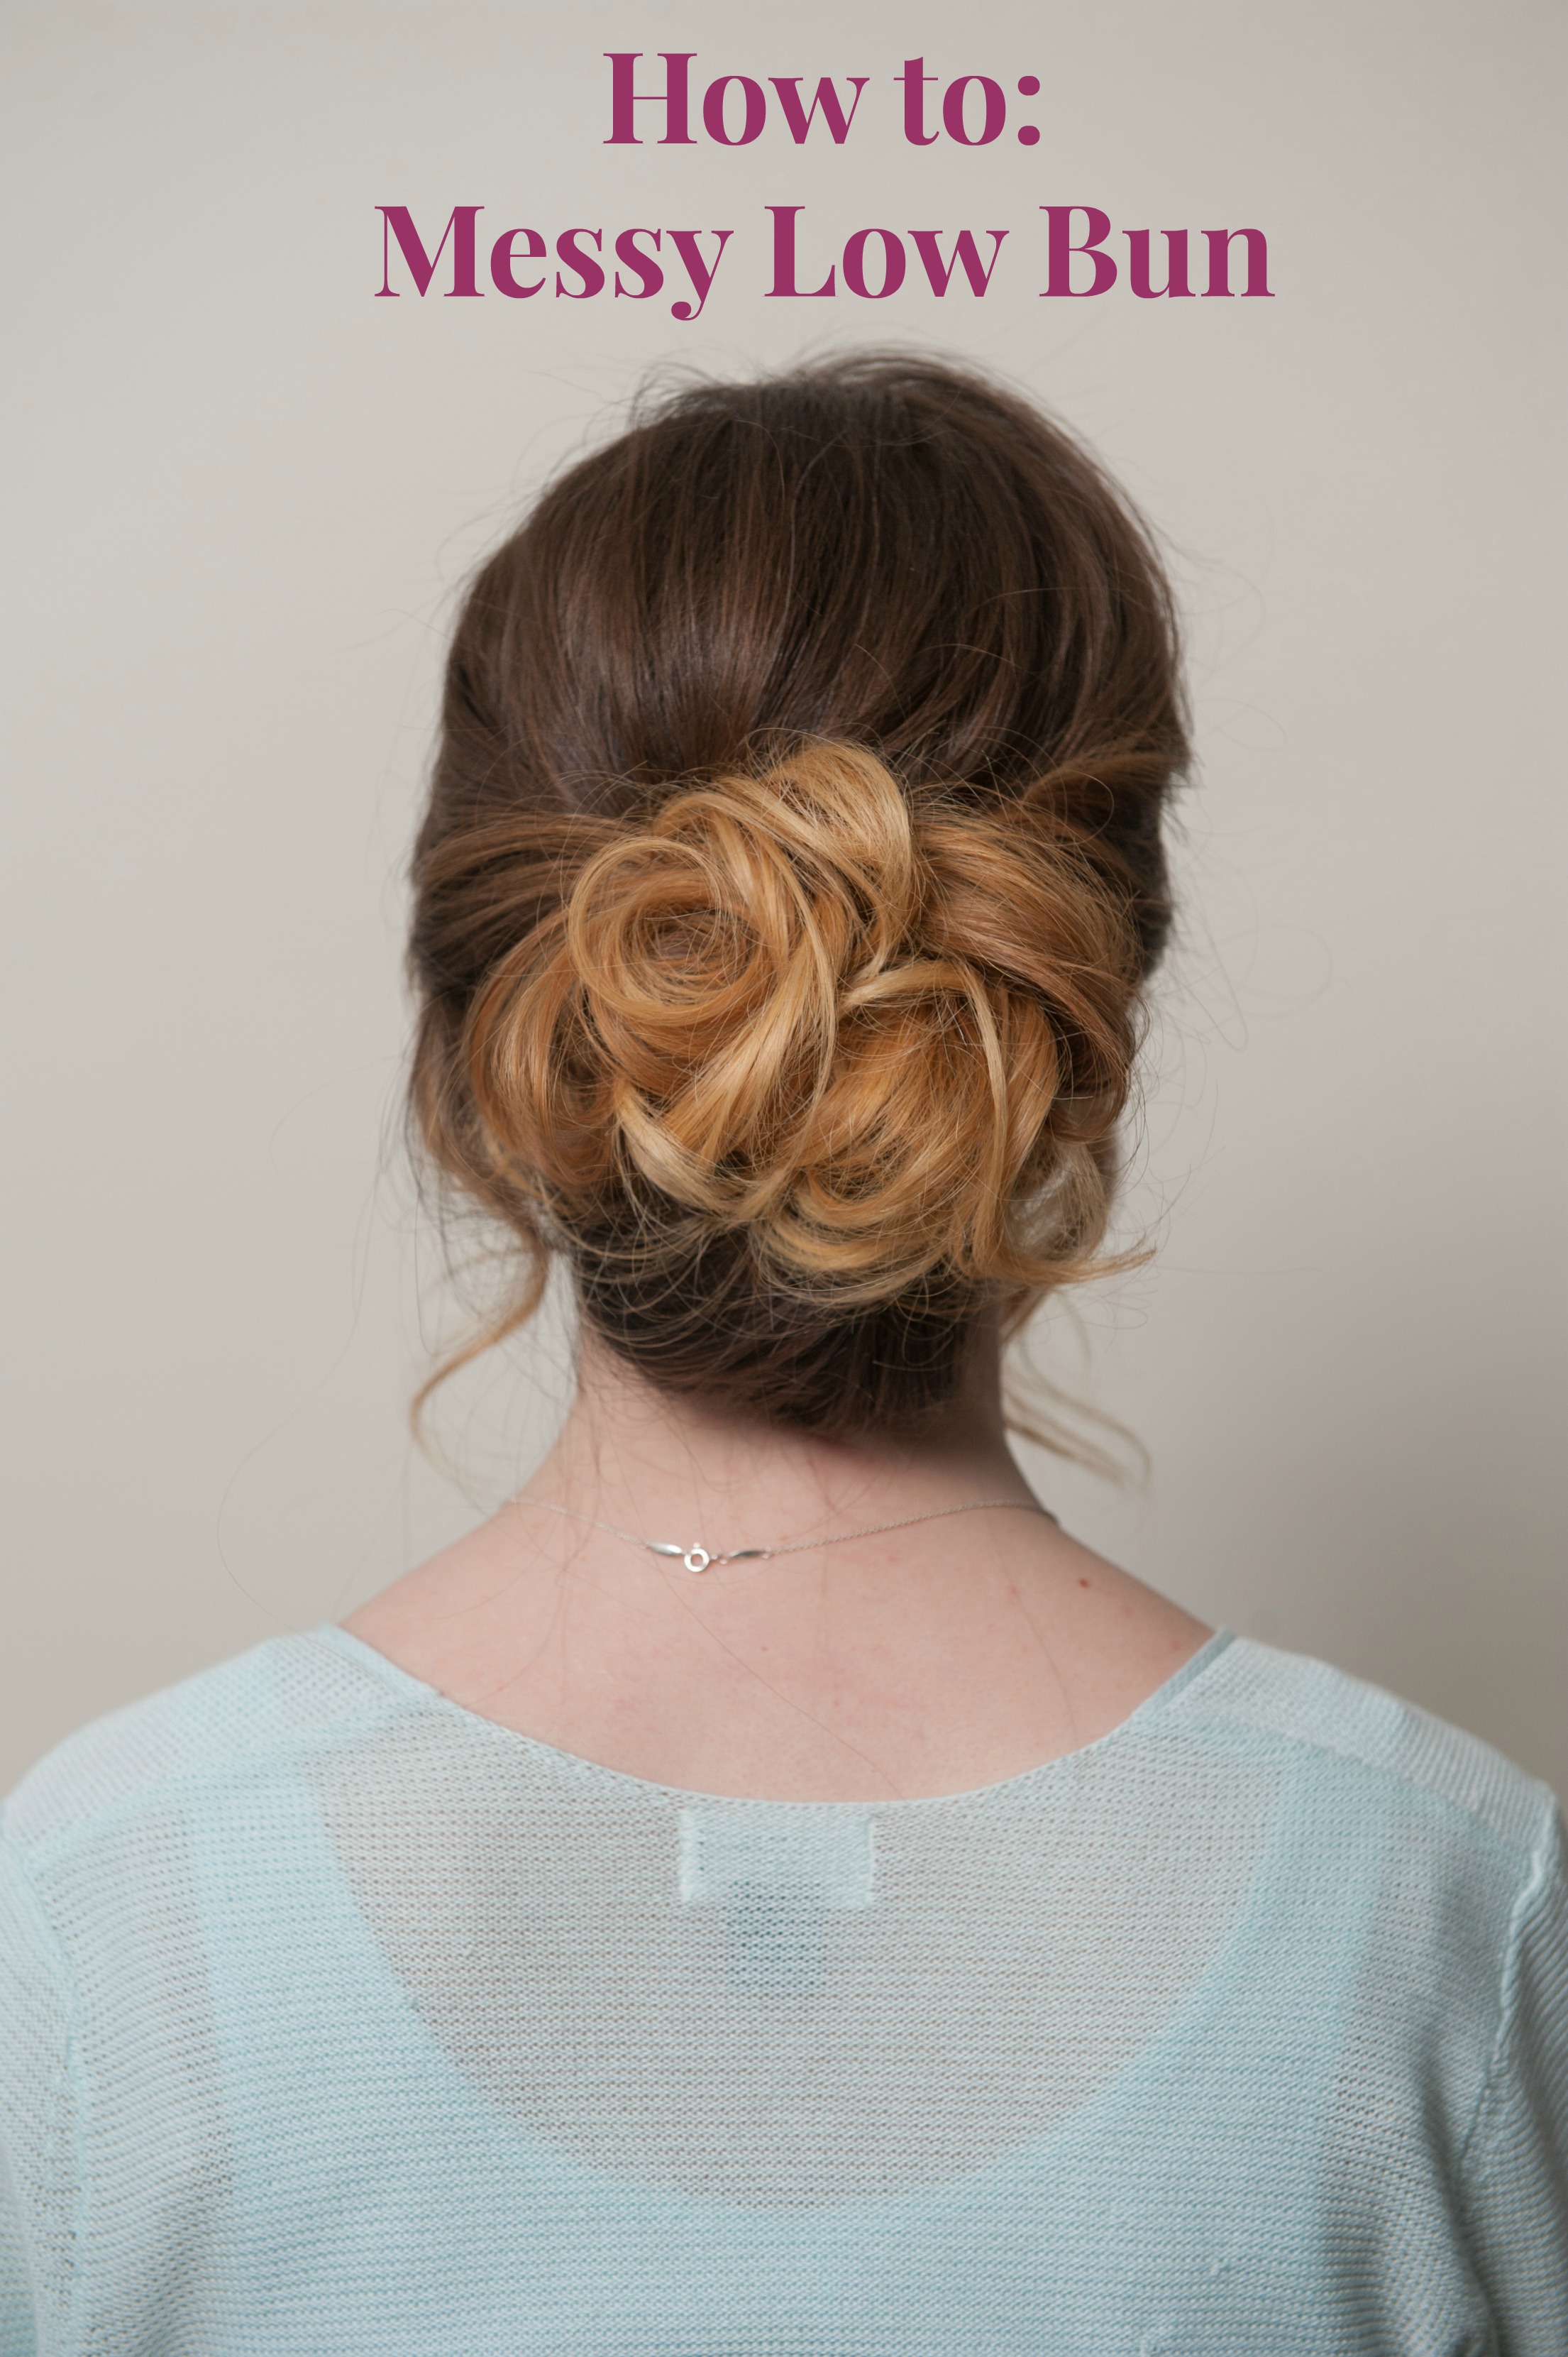 Hair how-to: Chic Messy Low Bun Tutorial | The Beauty Minimalist